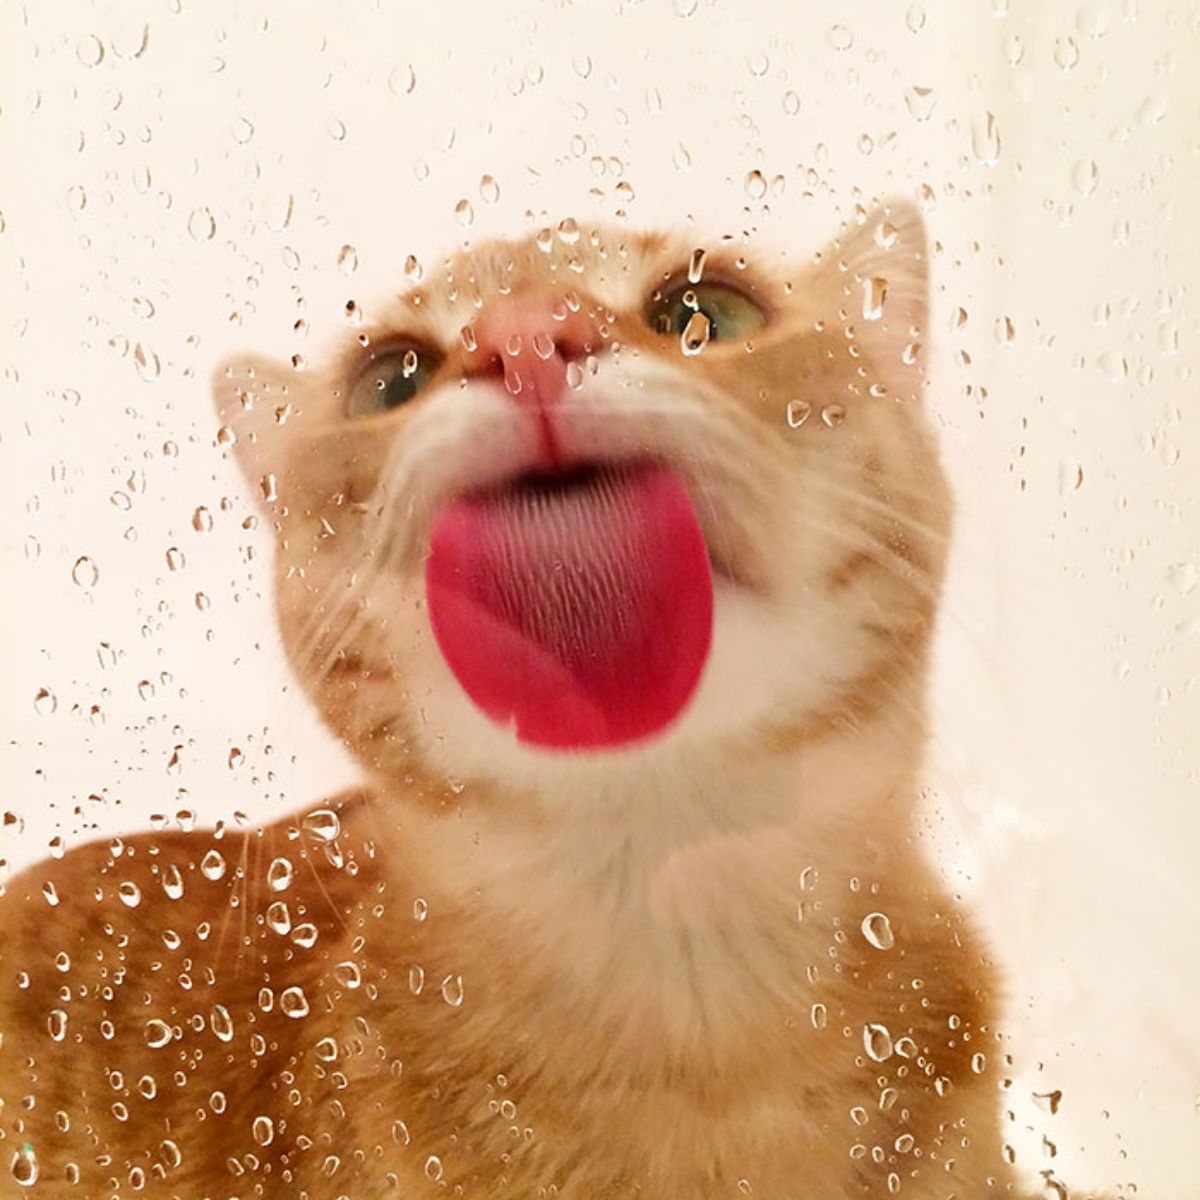 orange and white cat licking a glass with water droplets on it